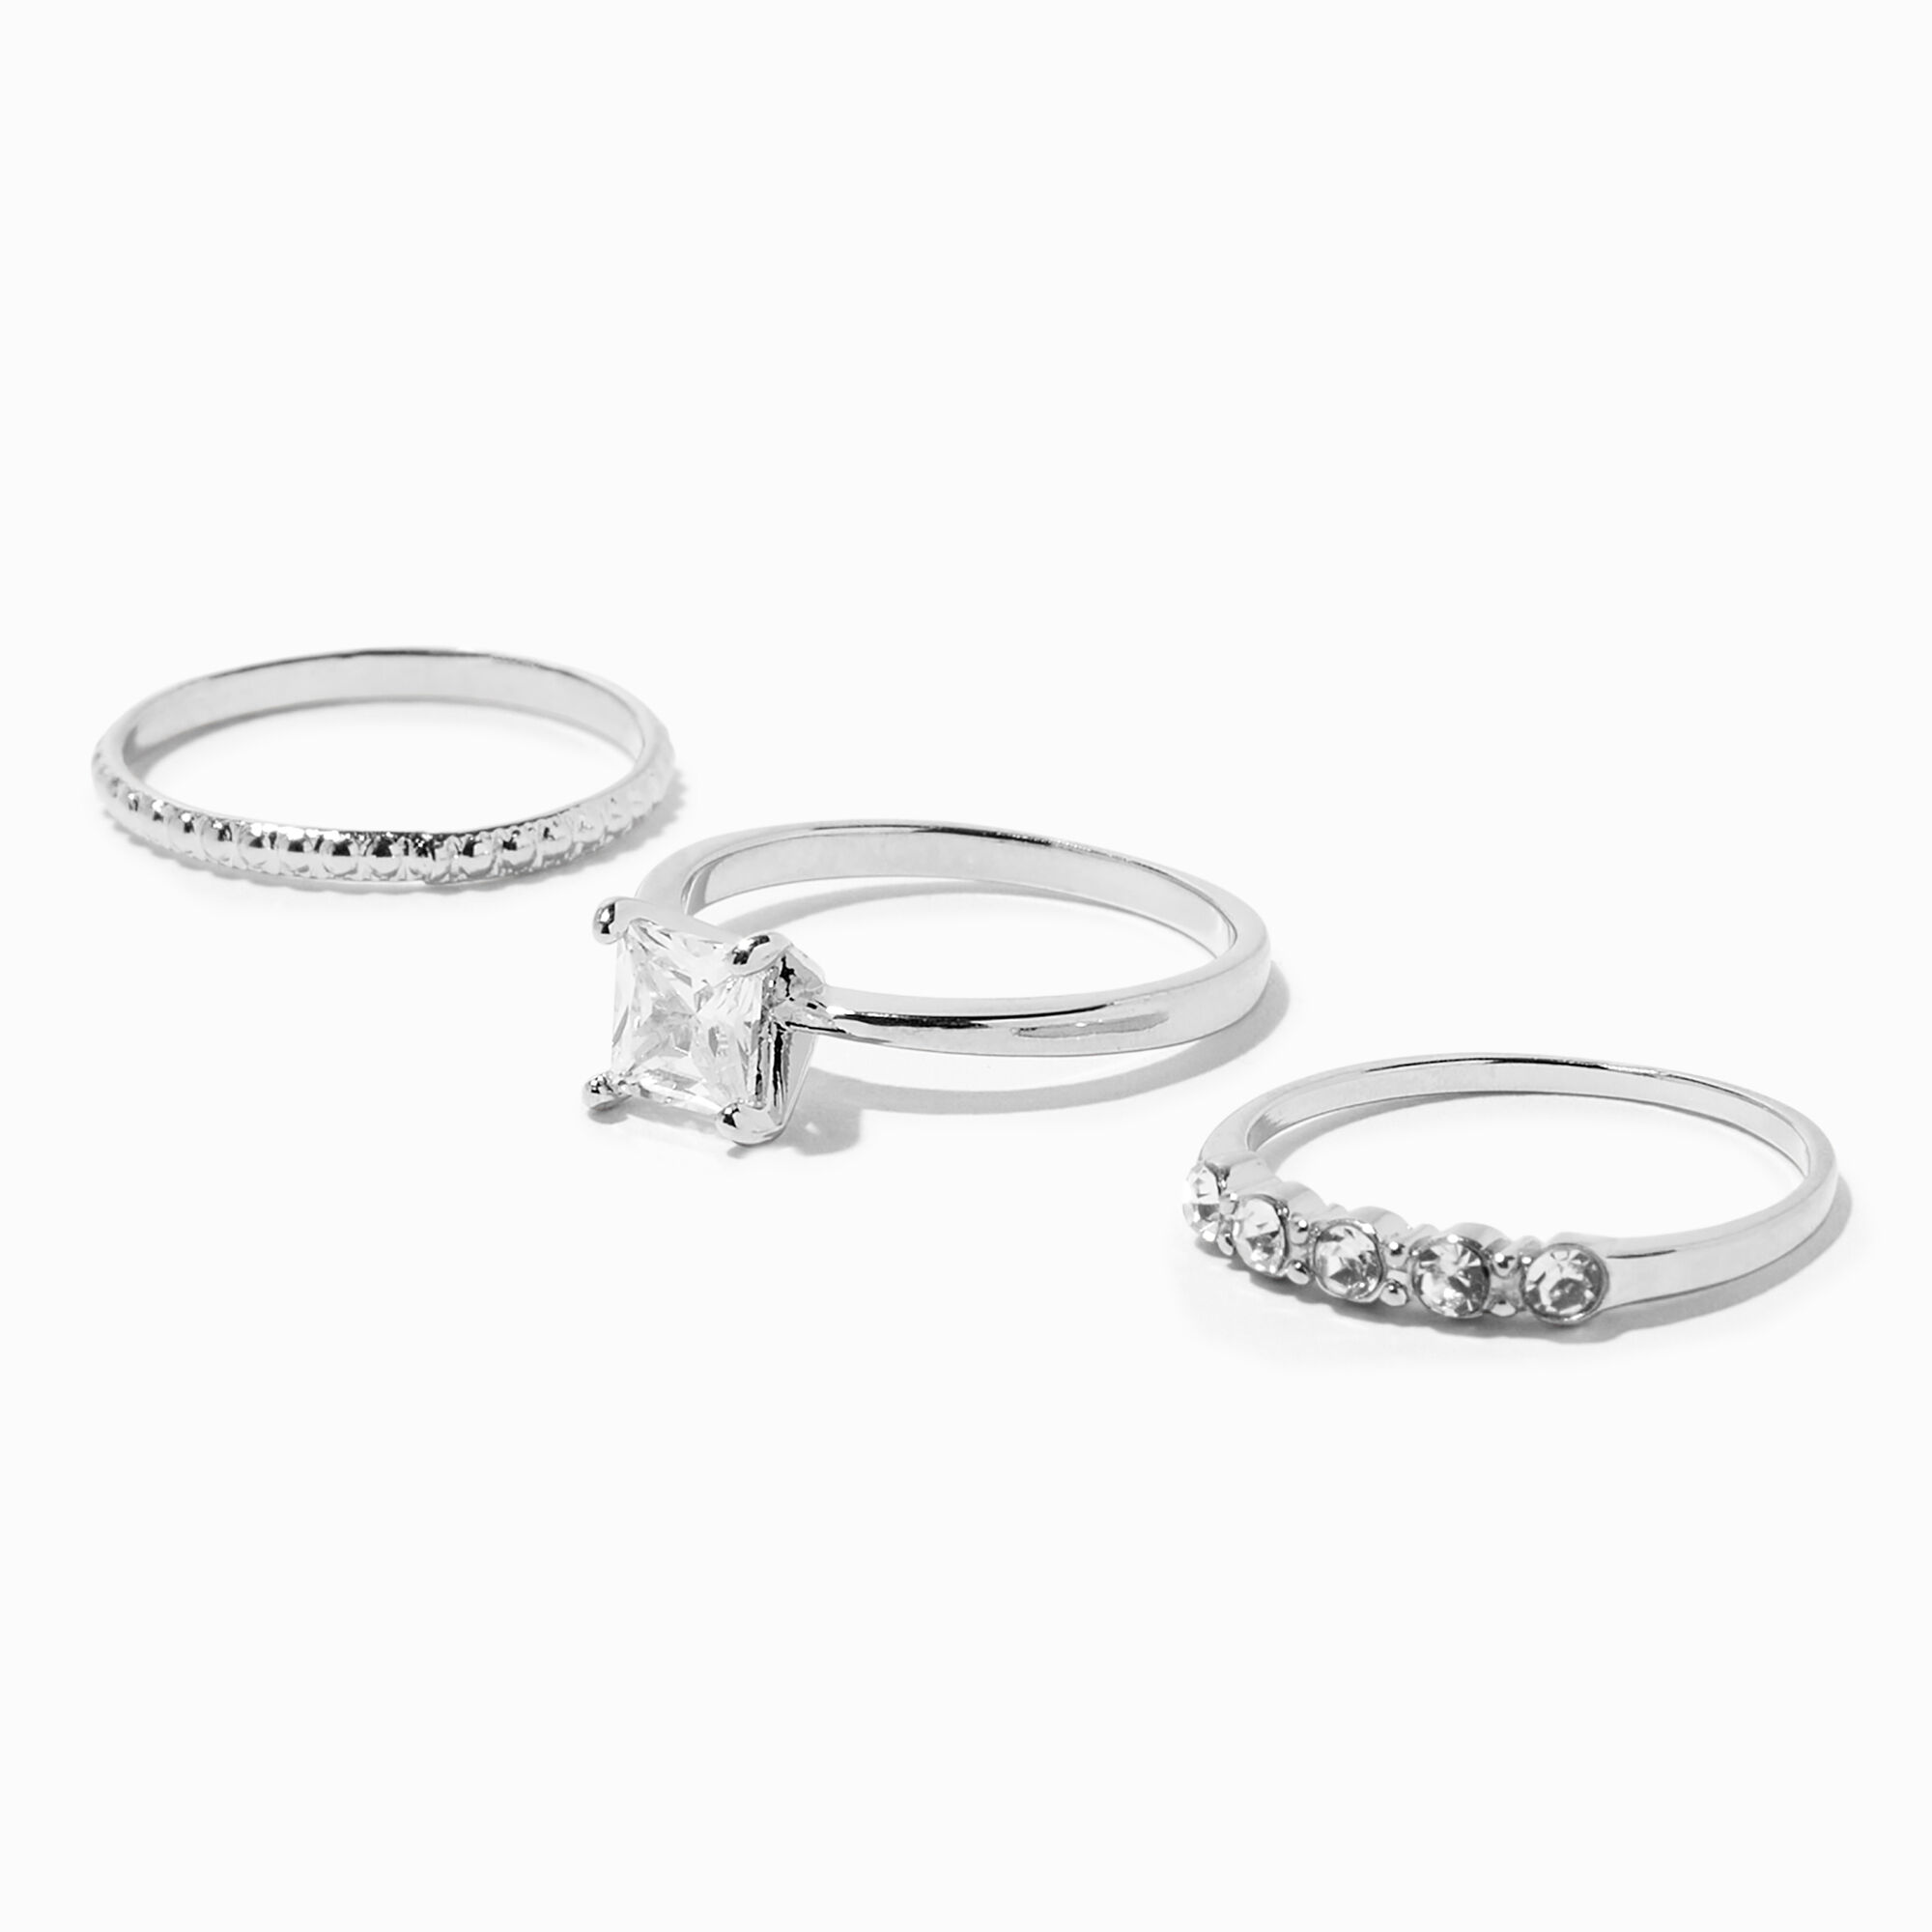 View Claires Tone Cubic Zirconia Square Ring Set 3 Pack Silver information